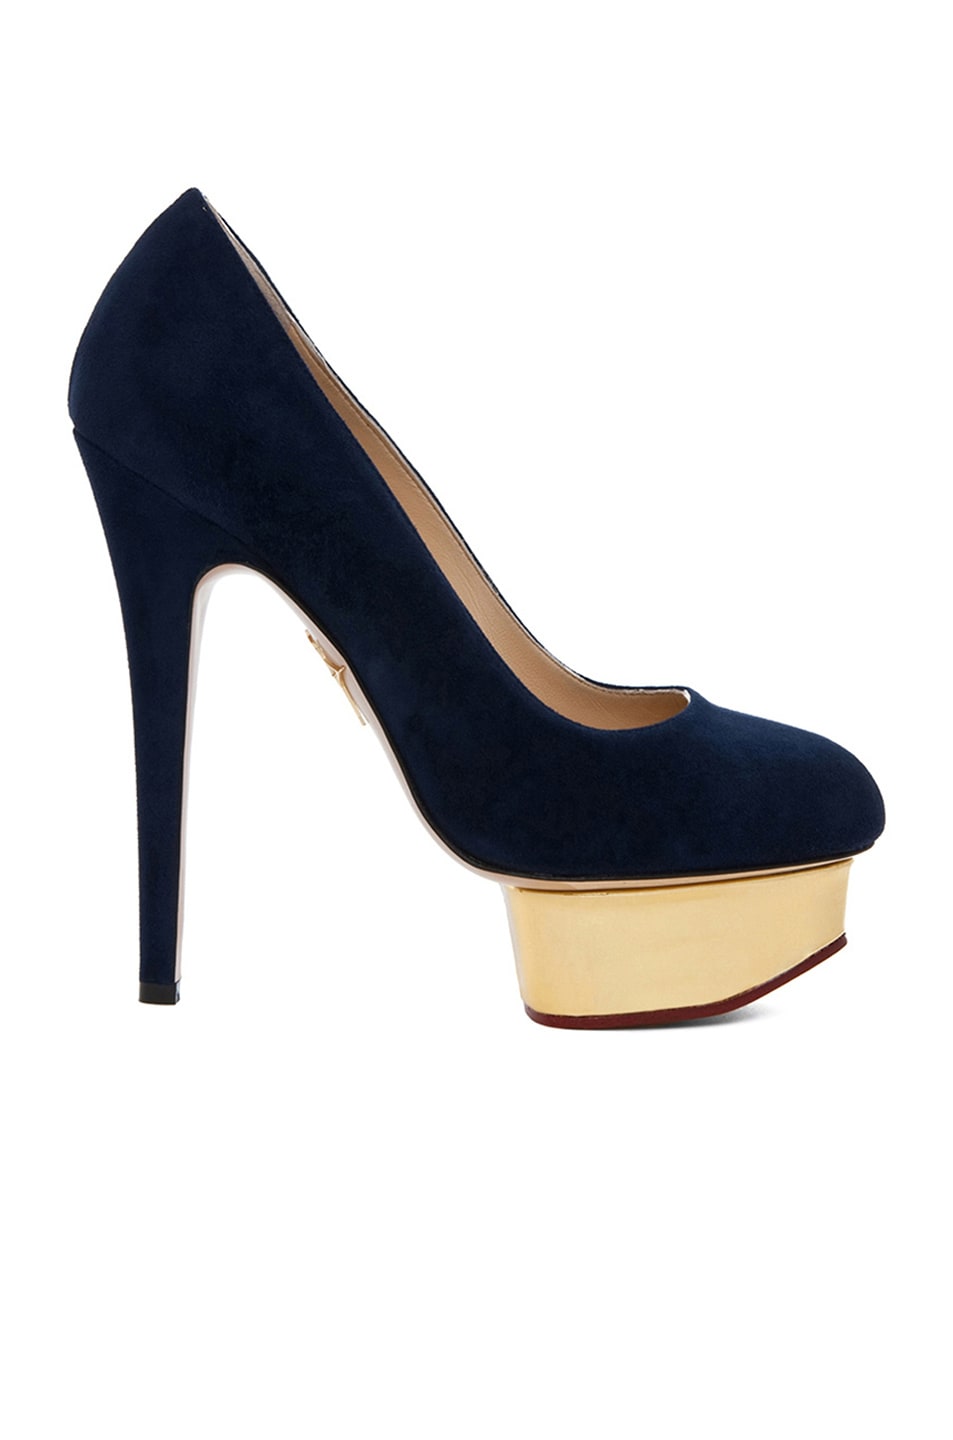 Image 1 of Charlotte Olympia Dolly Signature Court Island Suede Pumps in Navy Suede